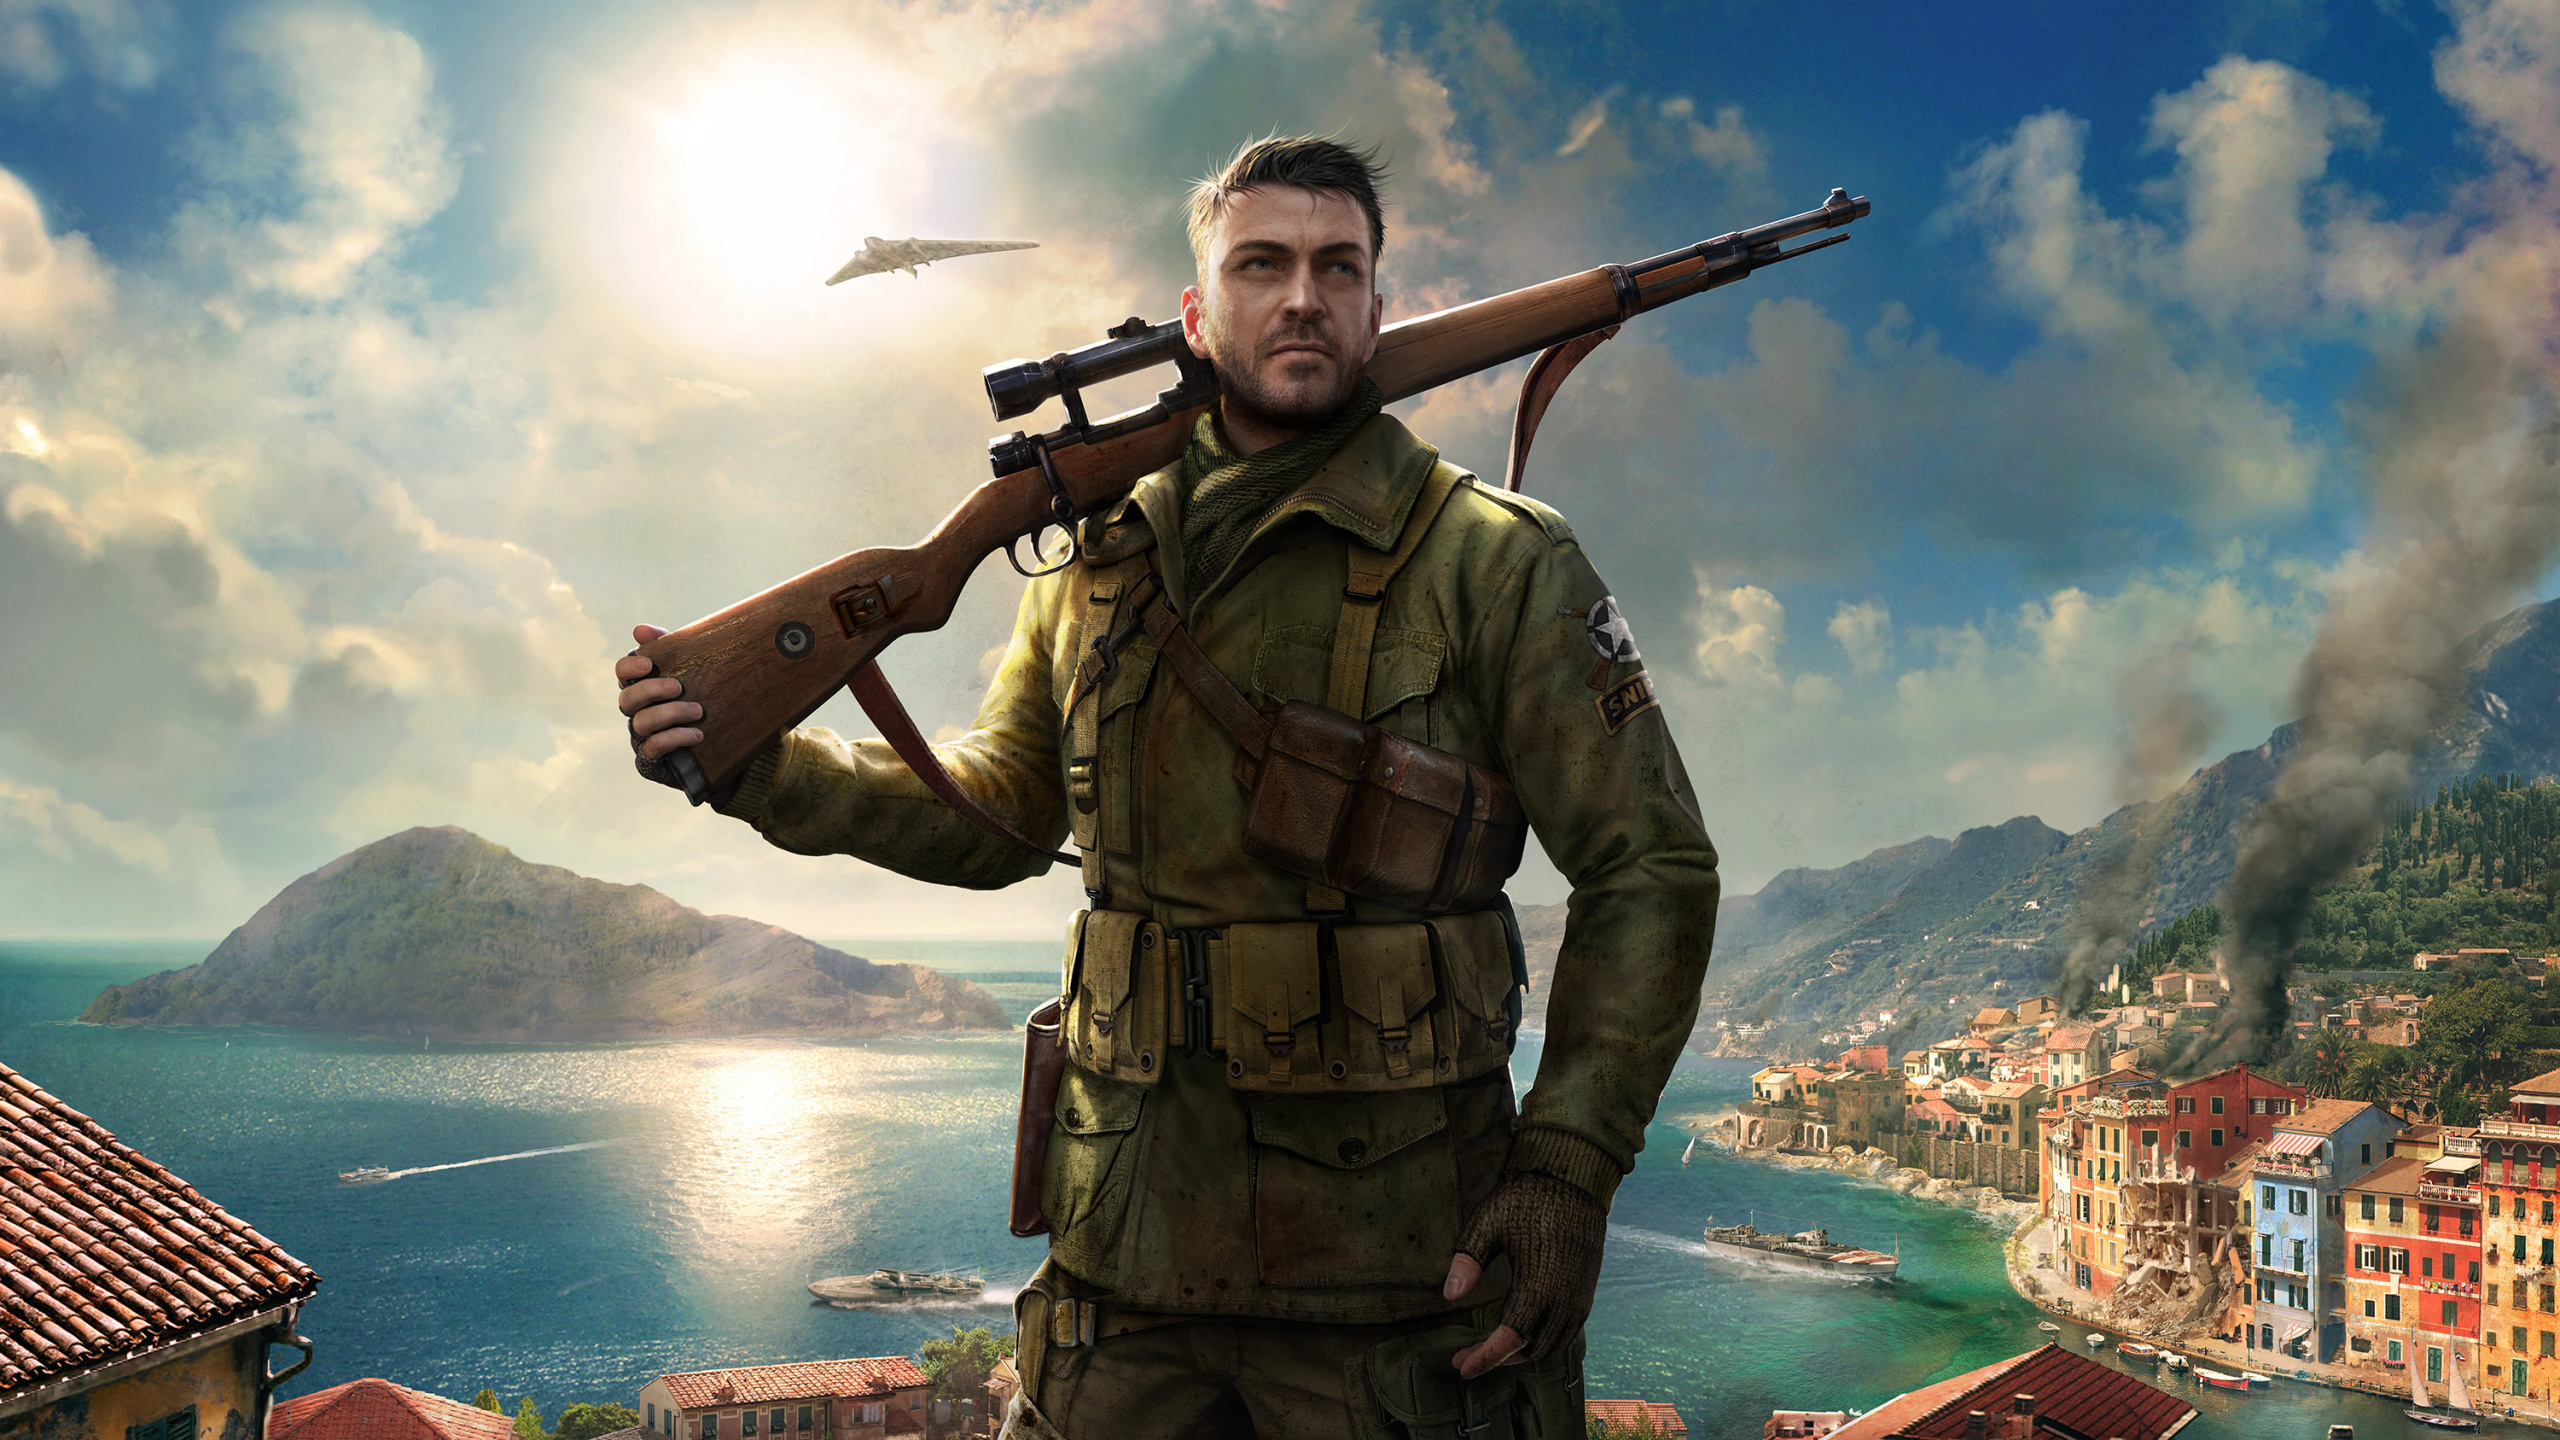 Sniper Elite 4, Shooter Game, Xbox One, Soldier, pc Game. Wallpaper in 2560x1440 Resolution